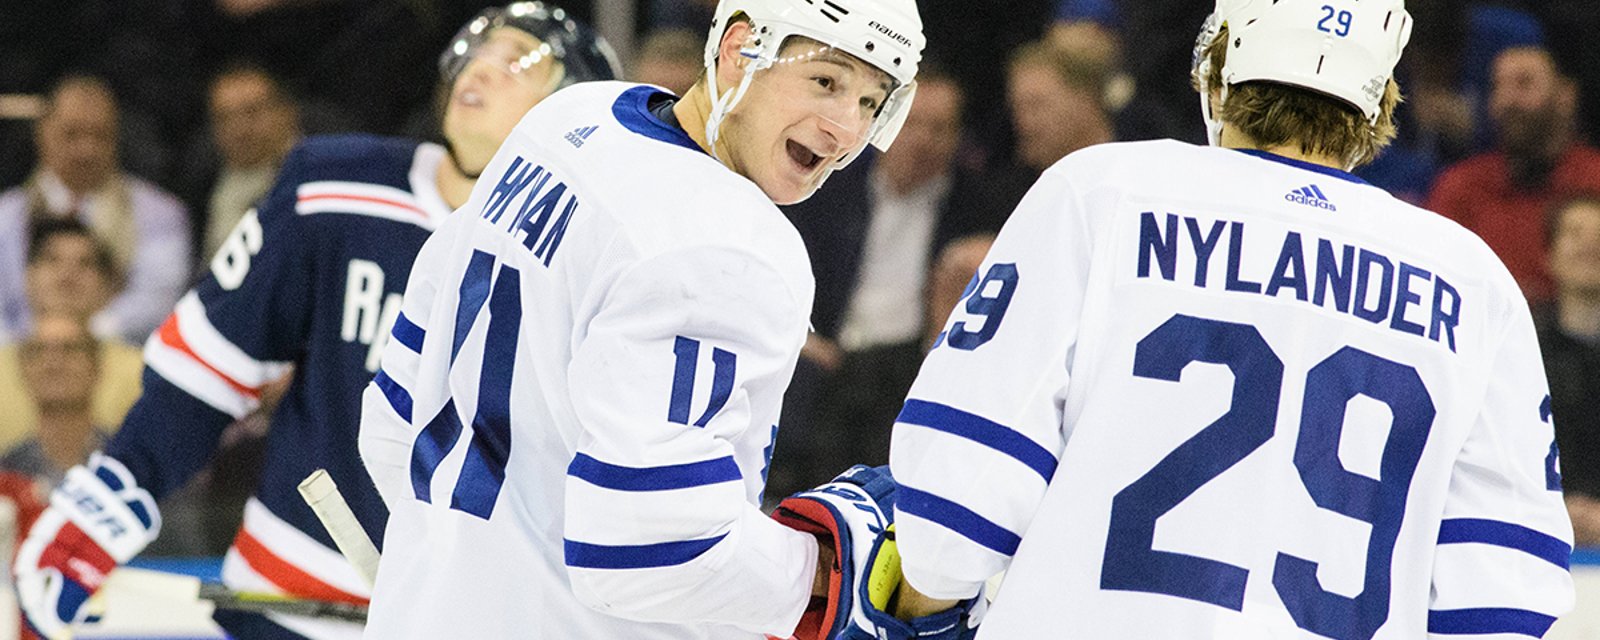 Leafs packaging up more players with Nylander for blockbuster trade?